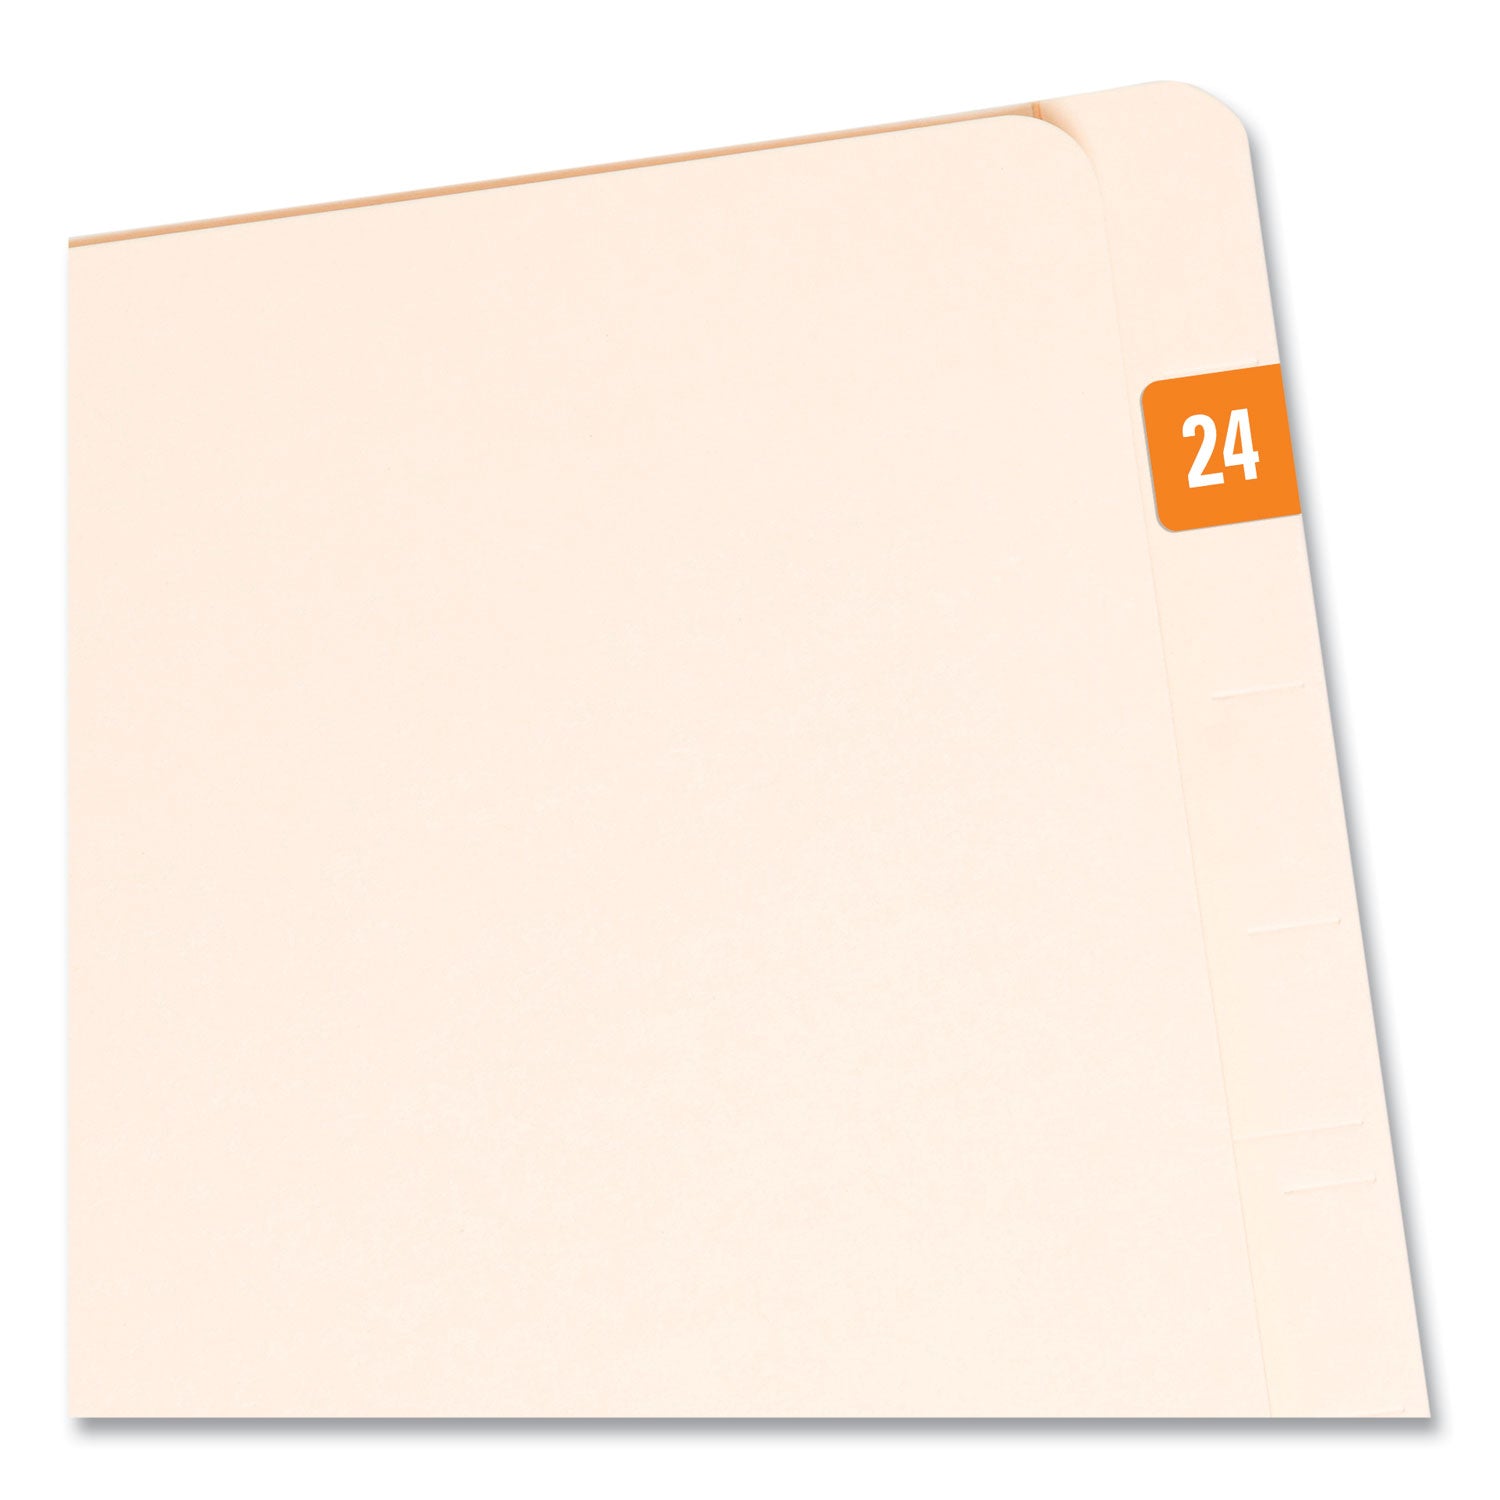 yearly-end-tab-file-folder-labels-24-05-x-1-orange-25-sheet-10-sheets-pack_smd67924 - 2